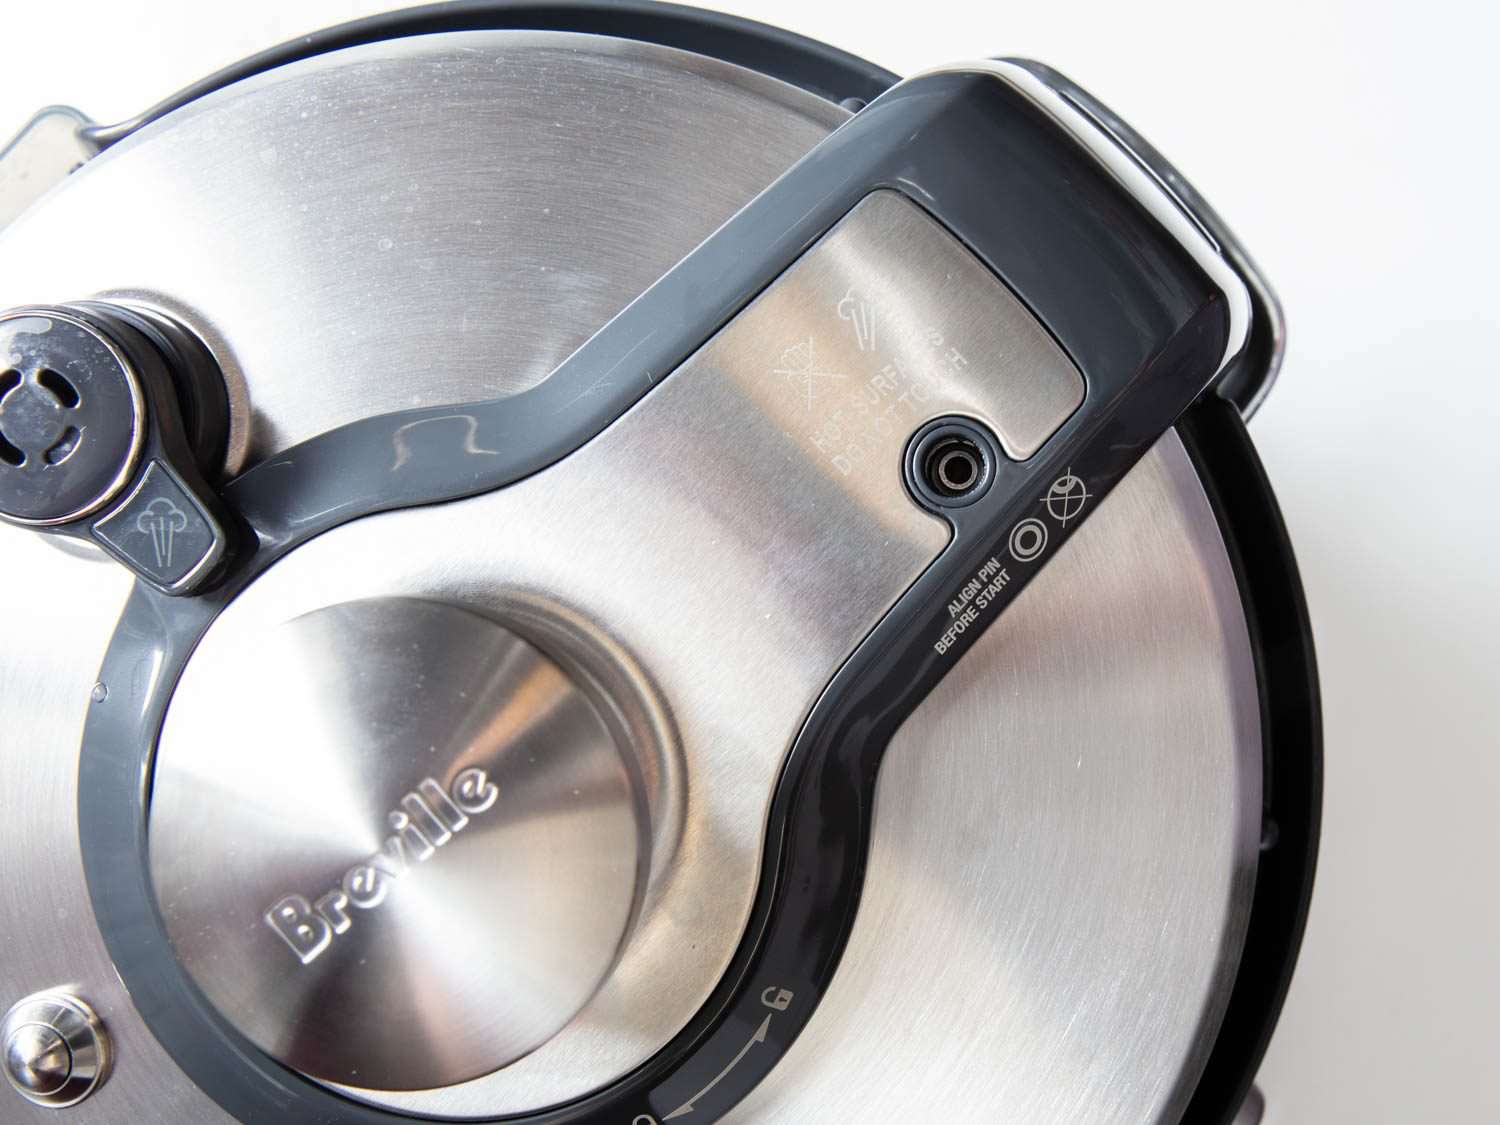 The safety-locking pin on a Breville Fast Slow Pro multicooker